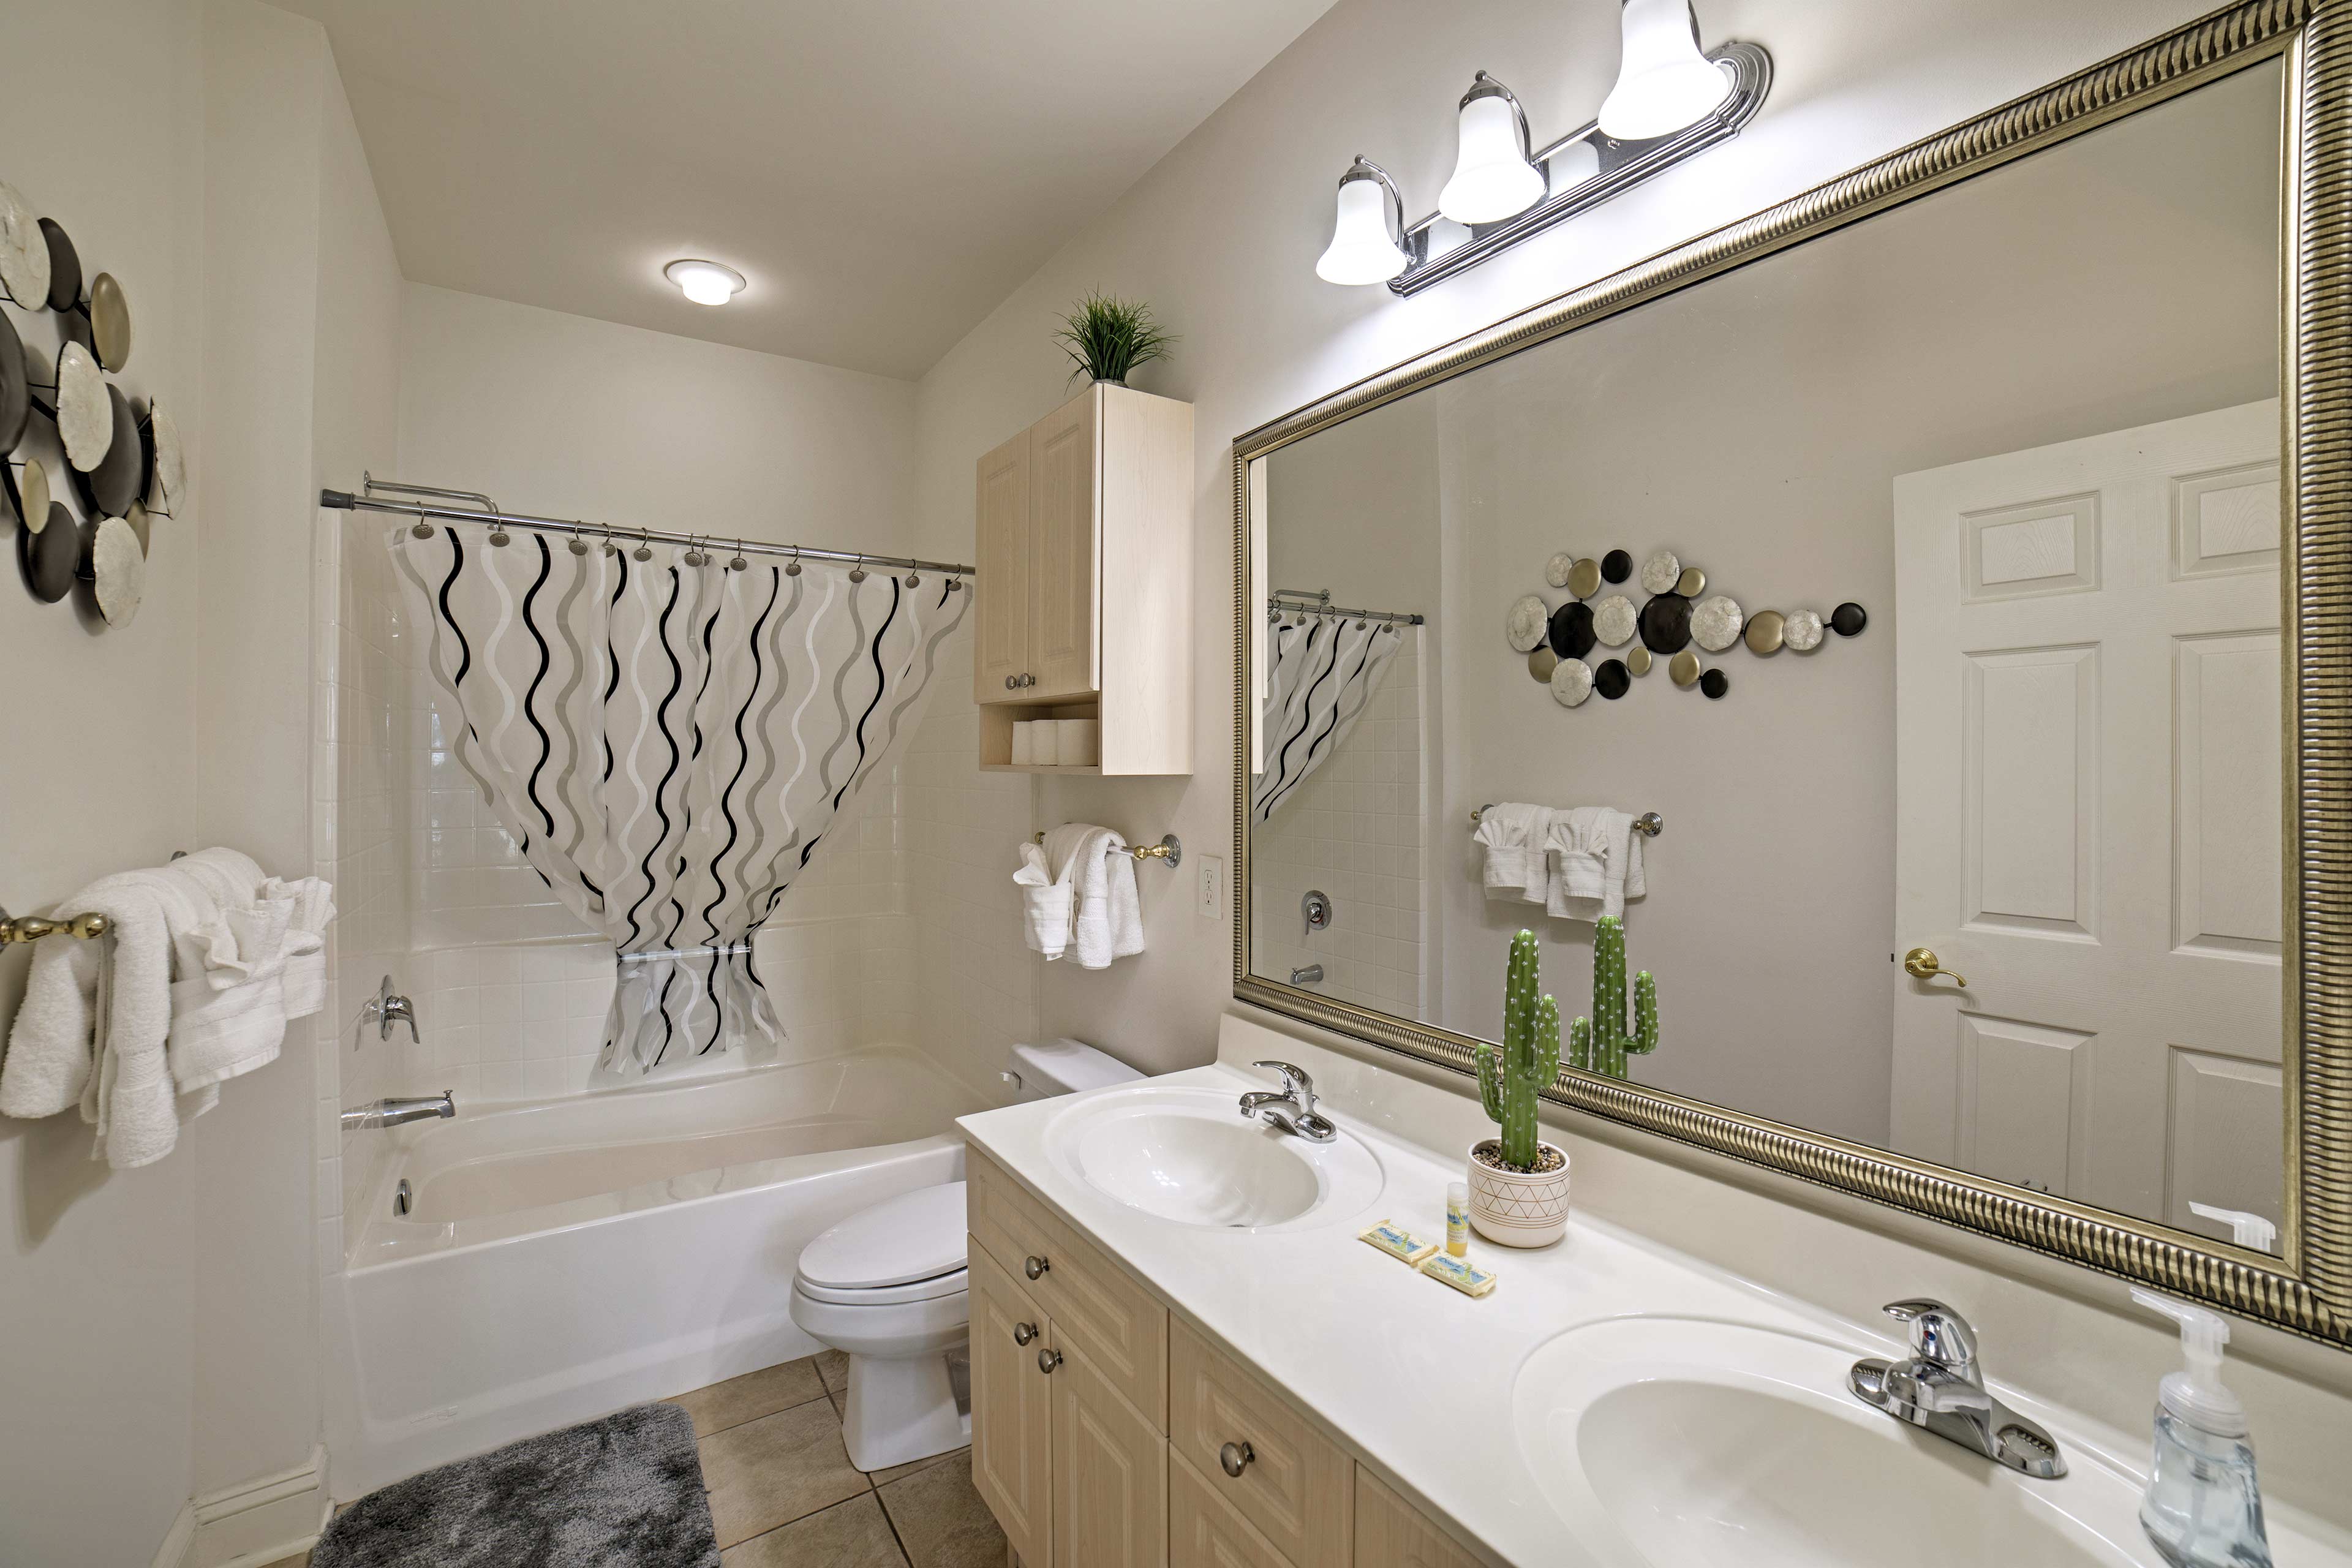 Your en-suite bathroom houses a double vanity and shower/tub combo.